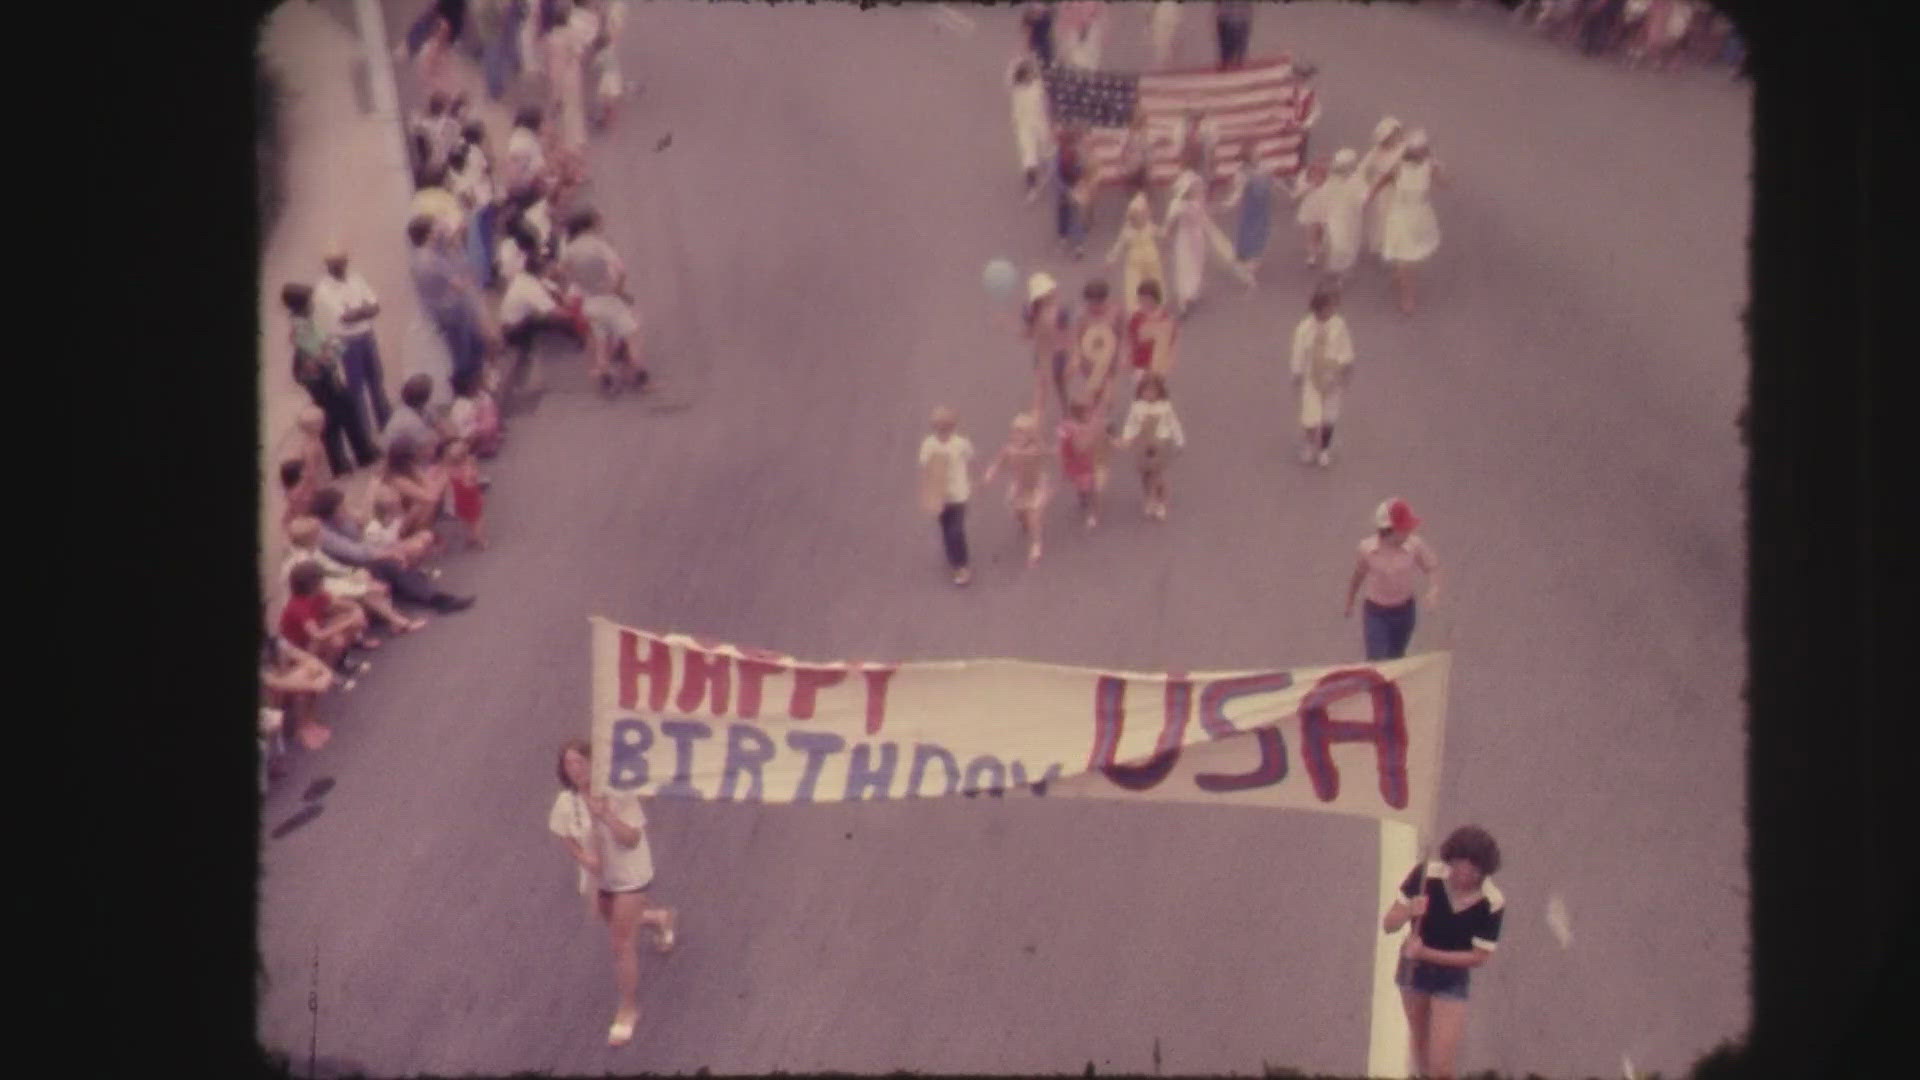 On July 4, 1976, city leaders organized the event to recognize the country's 200th birthday!